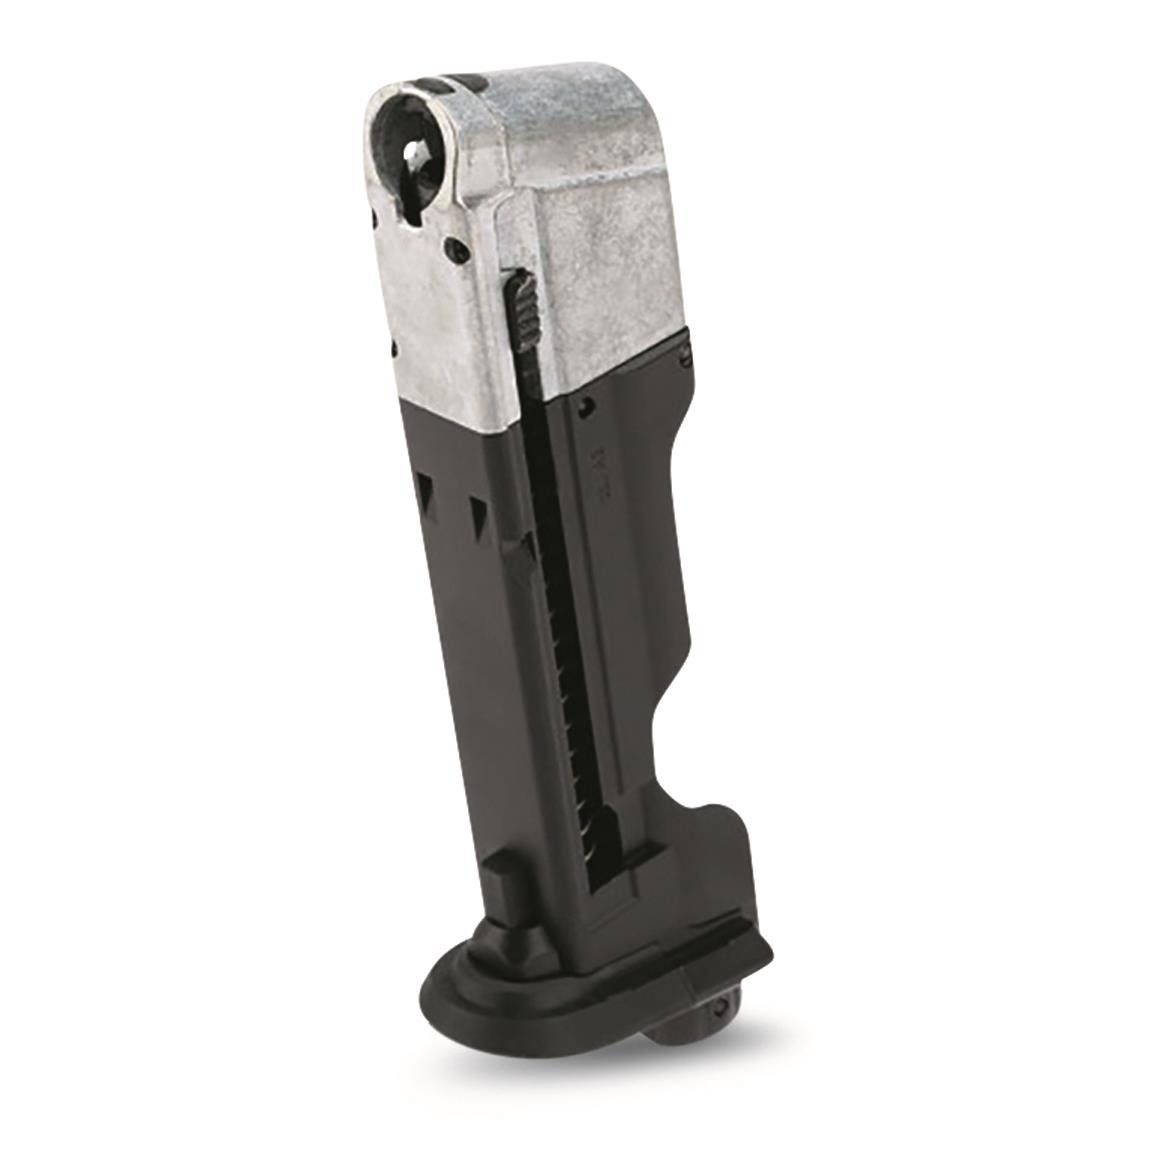 T4E Quick-piercing Magazine for Walther PPQ M2 Training Marker/Paintball Pistol, .43 cal., 8 Rds.